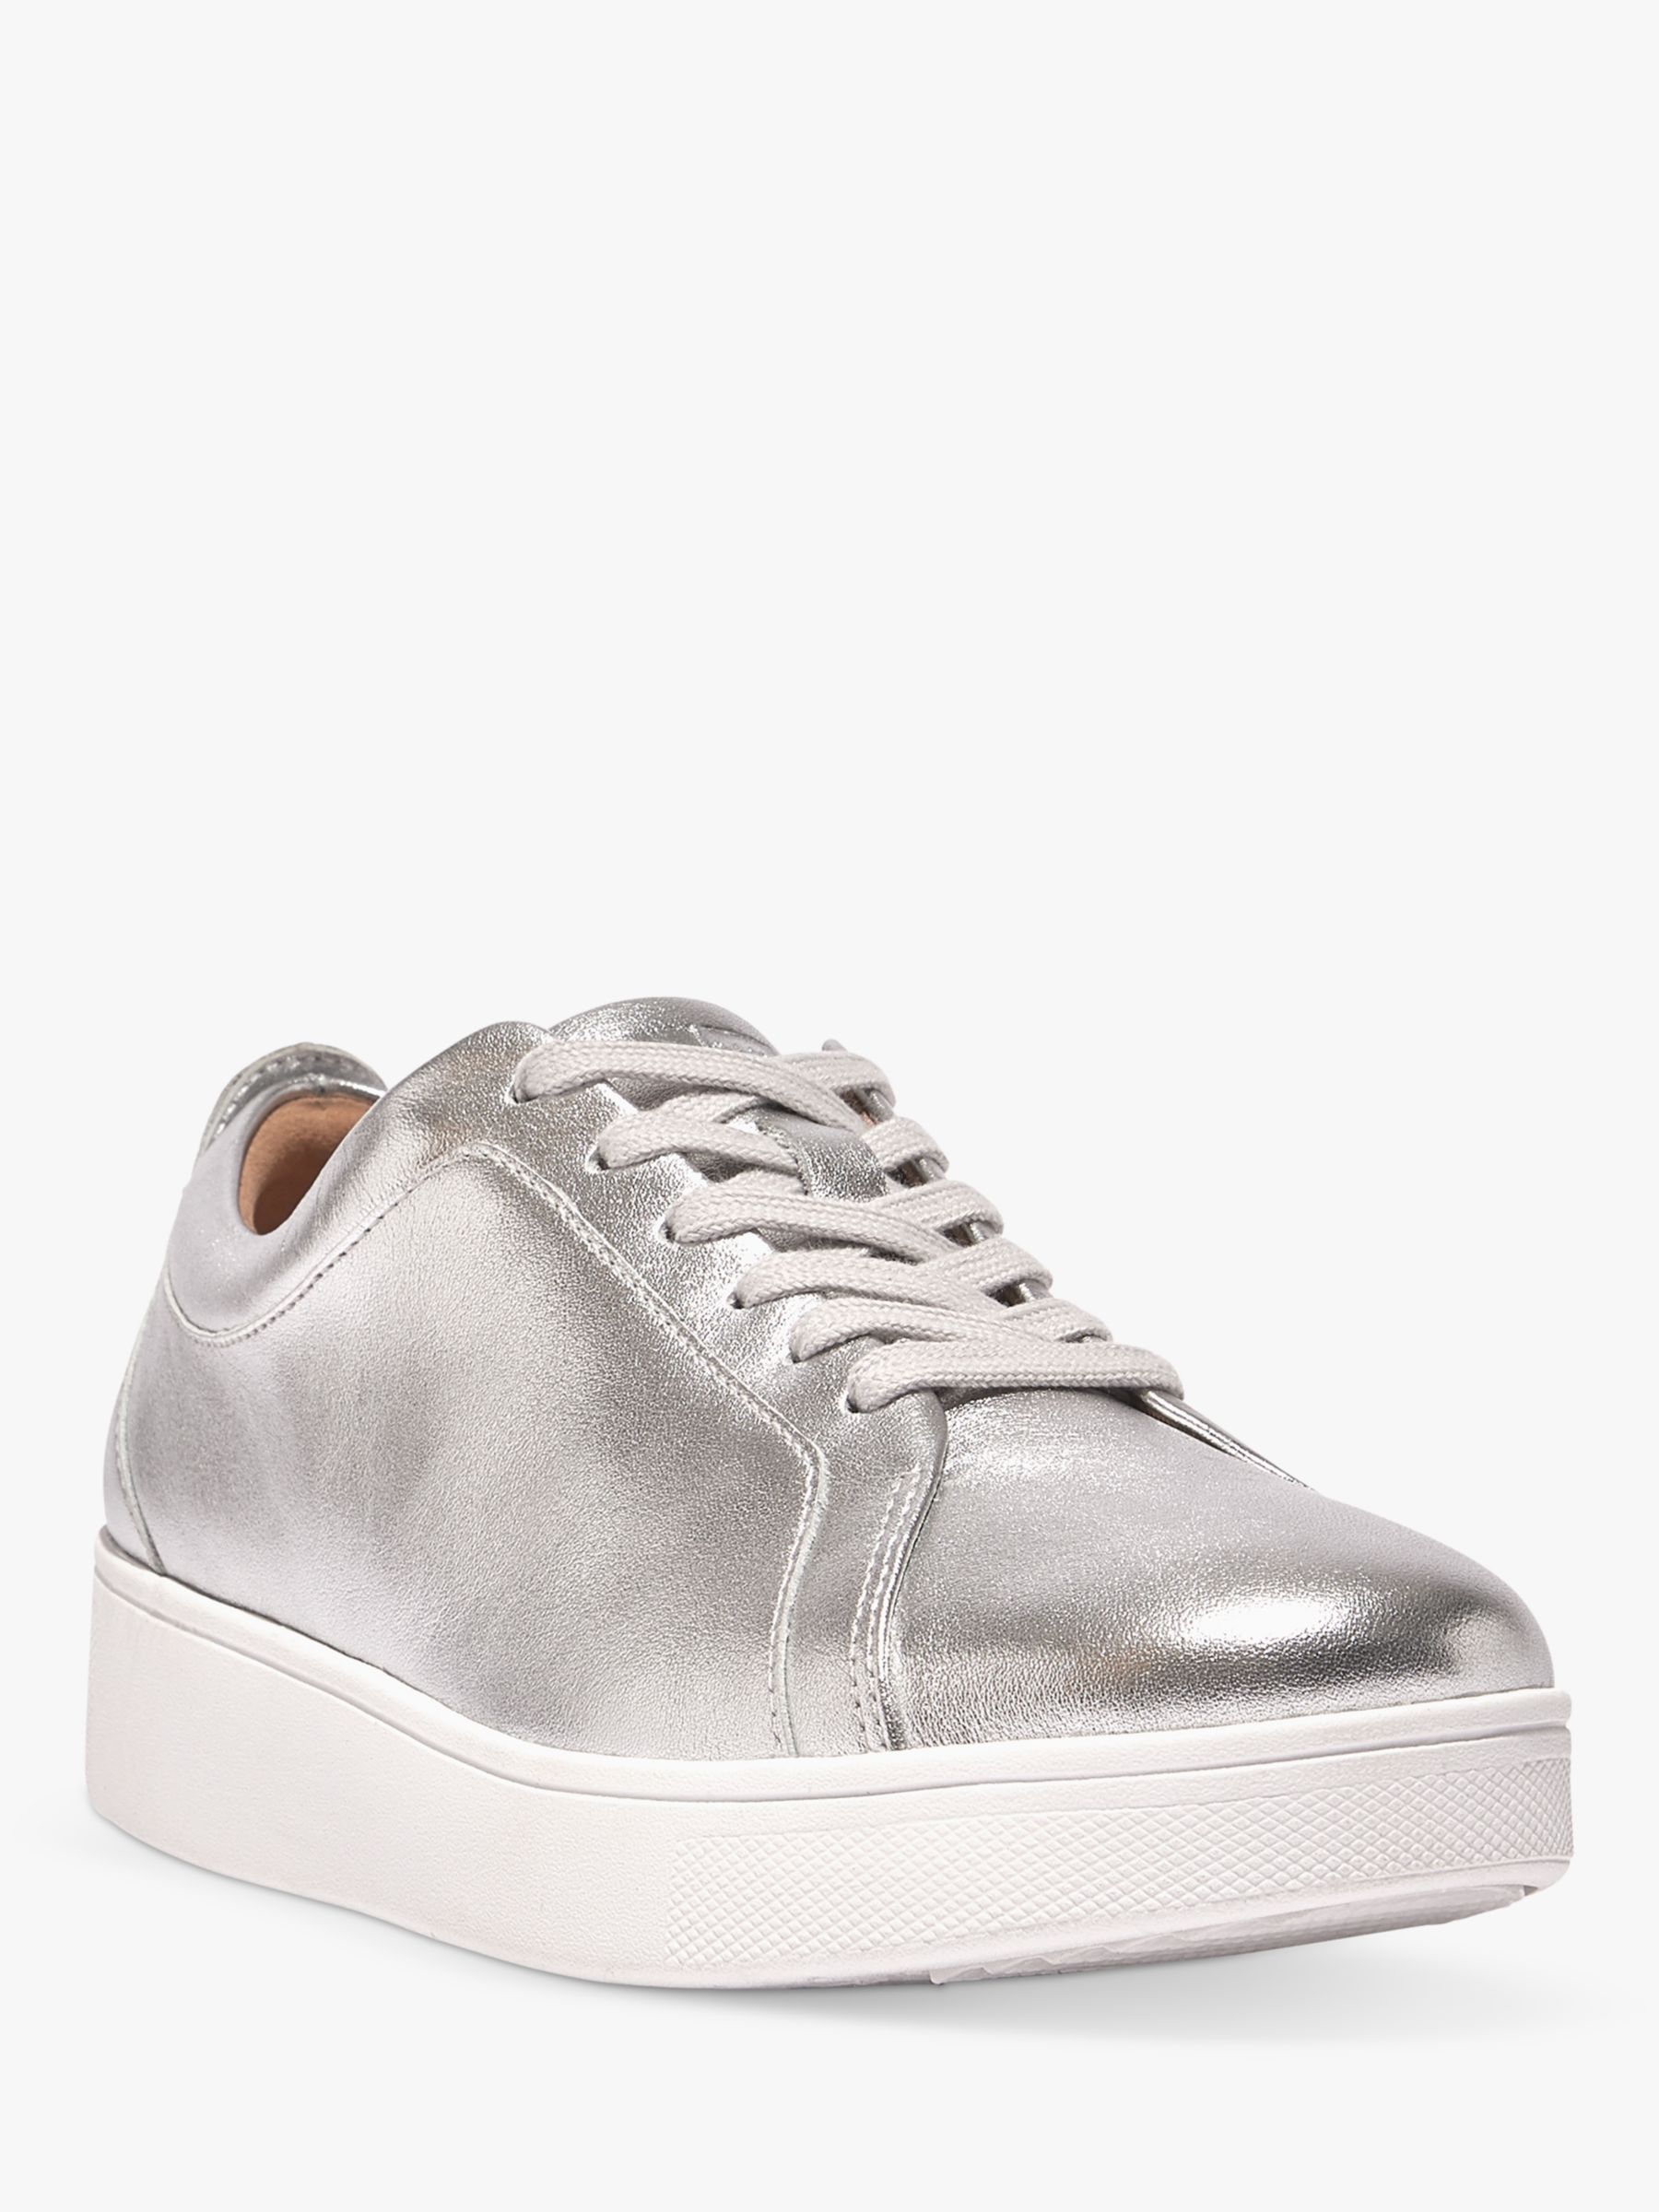 Hush Puppies Camille Lace-Up Leather Trainers, Silver at John